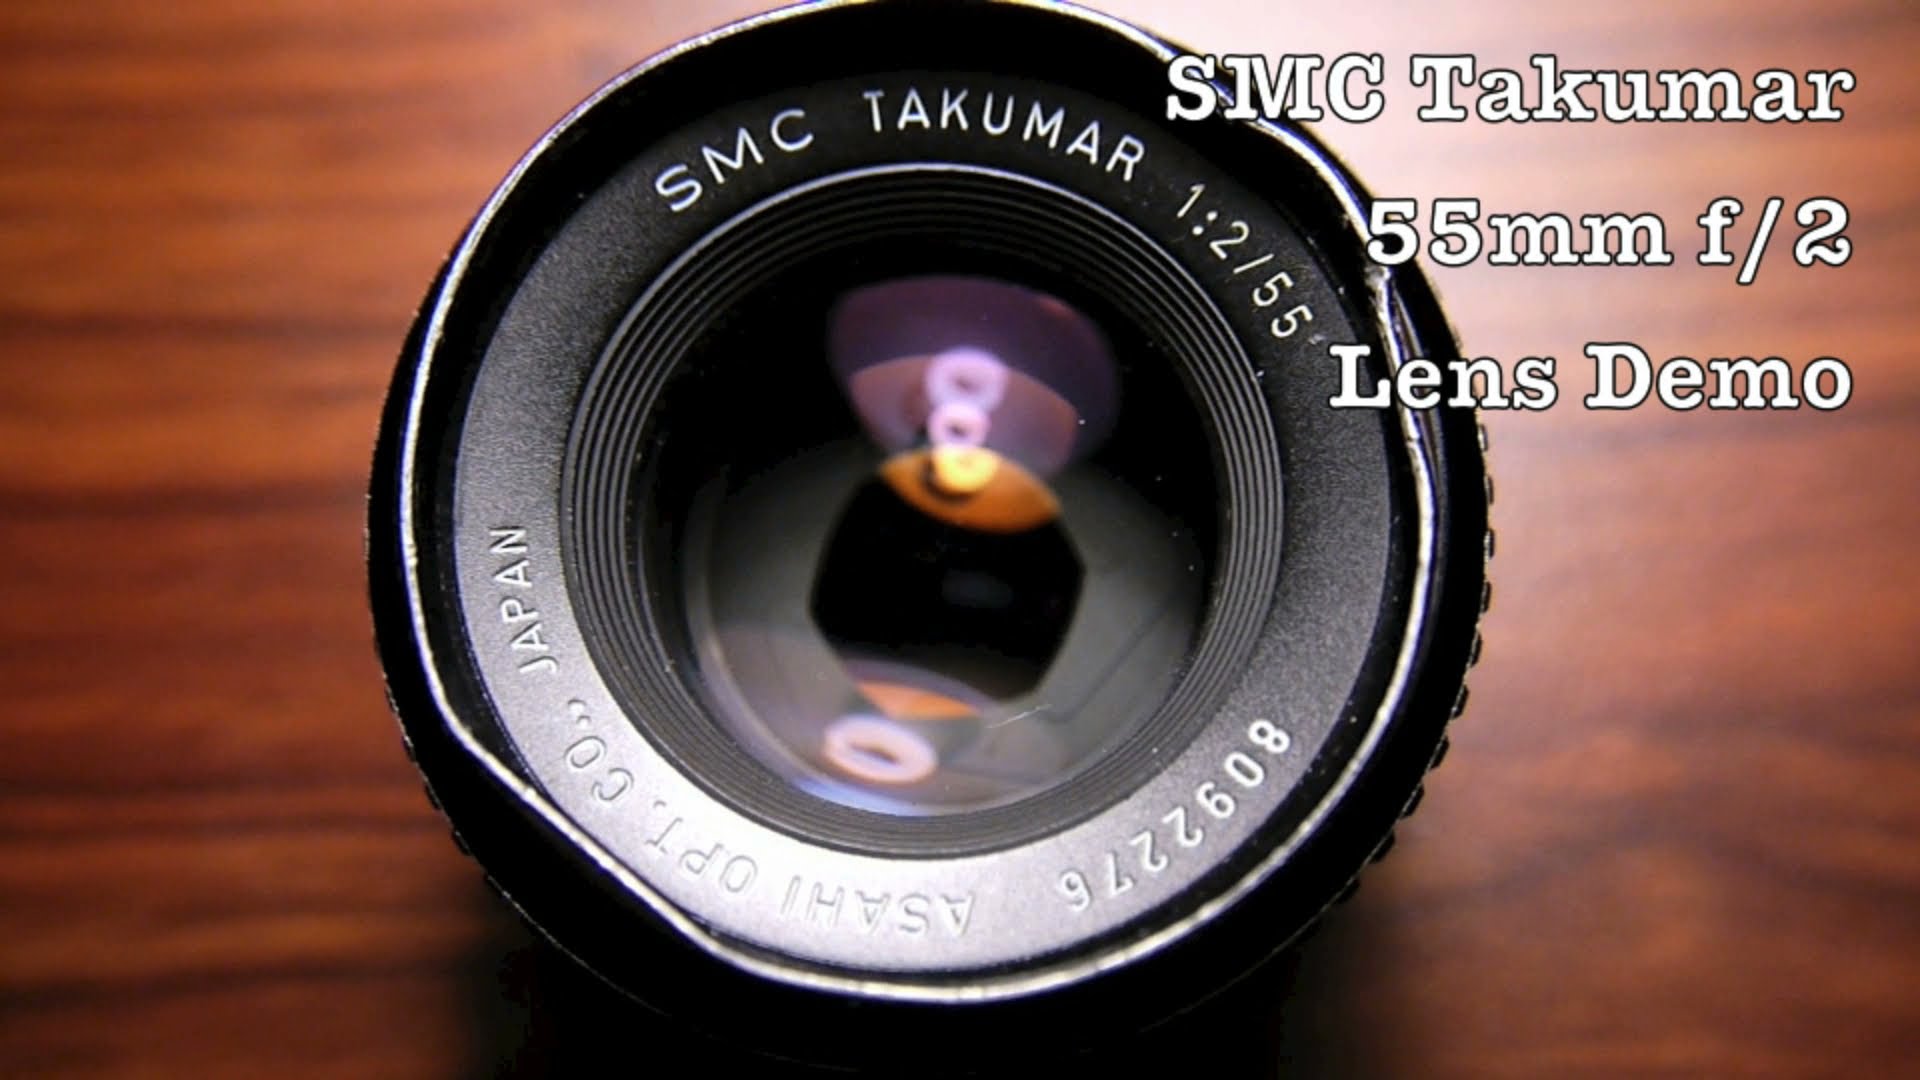 Takumar 55mm f/2 Normal Lens For m42 Mount 35mm SLR Cameras to DSLR Like Canon & Nikon w/ Adapters